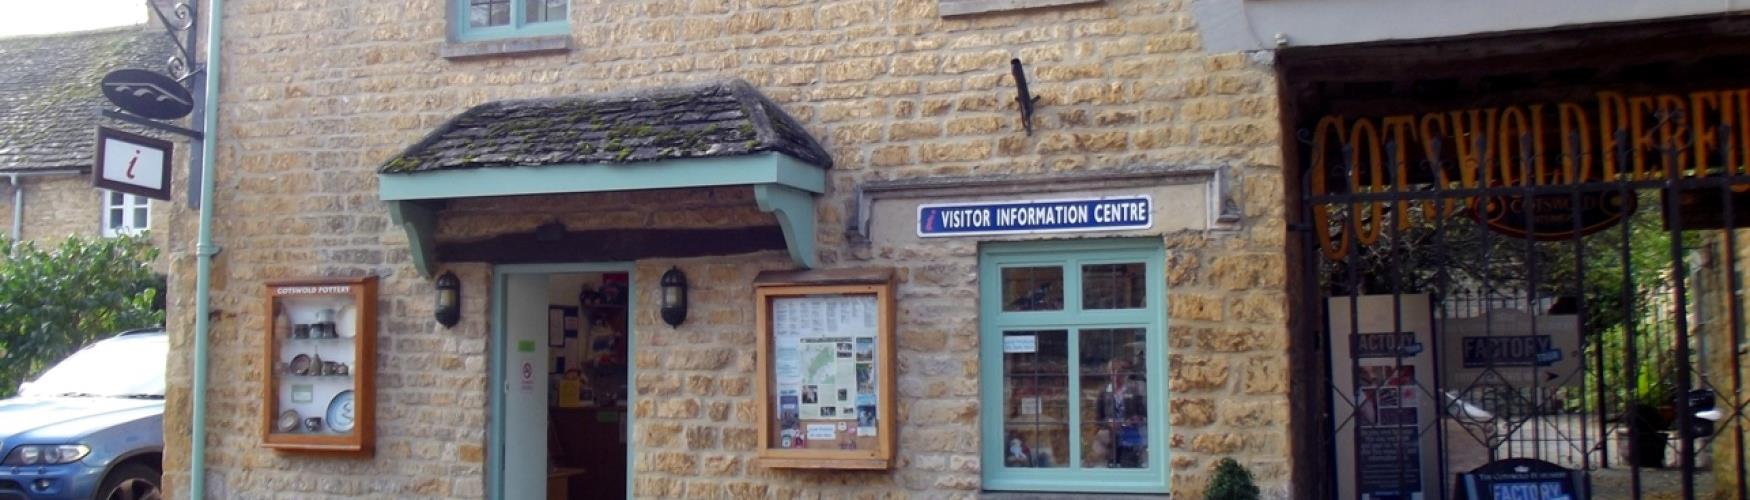 Bourton-on-the-Water Visitor Information Centre